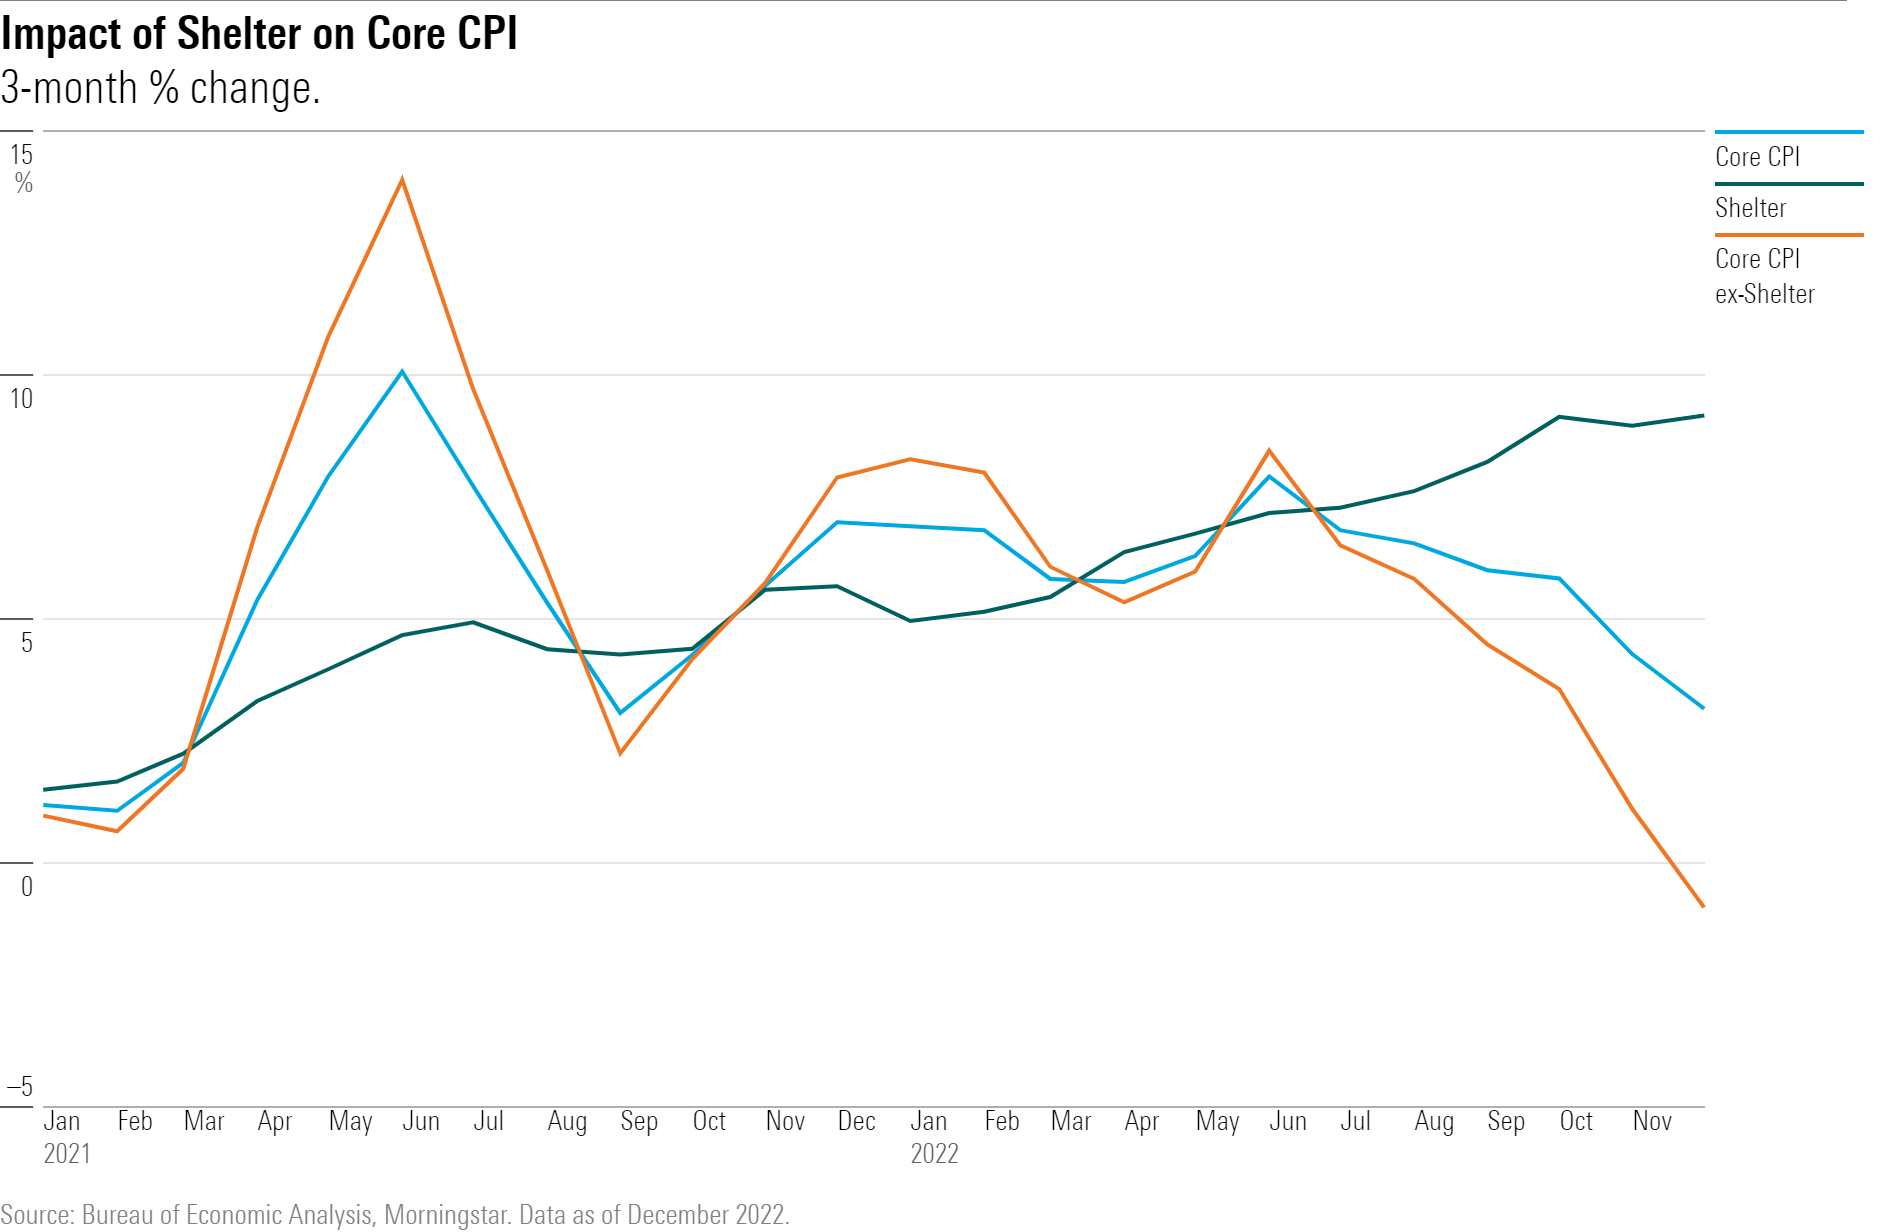 3-month % change in core CPI, shelter, and core CPI ex-shelter.